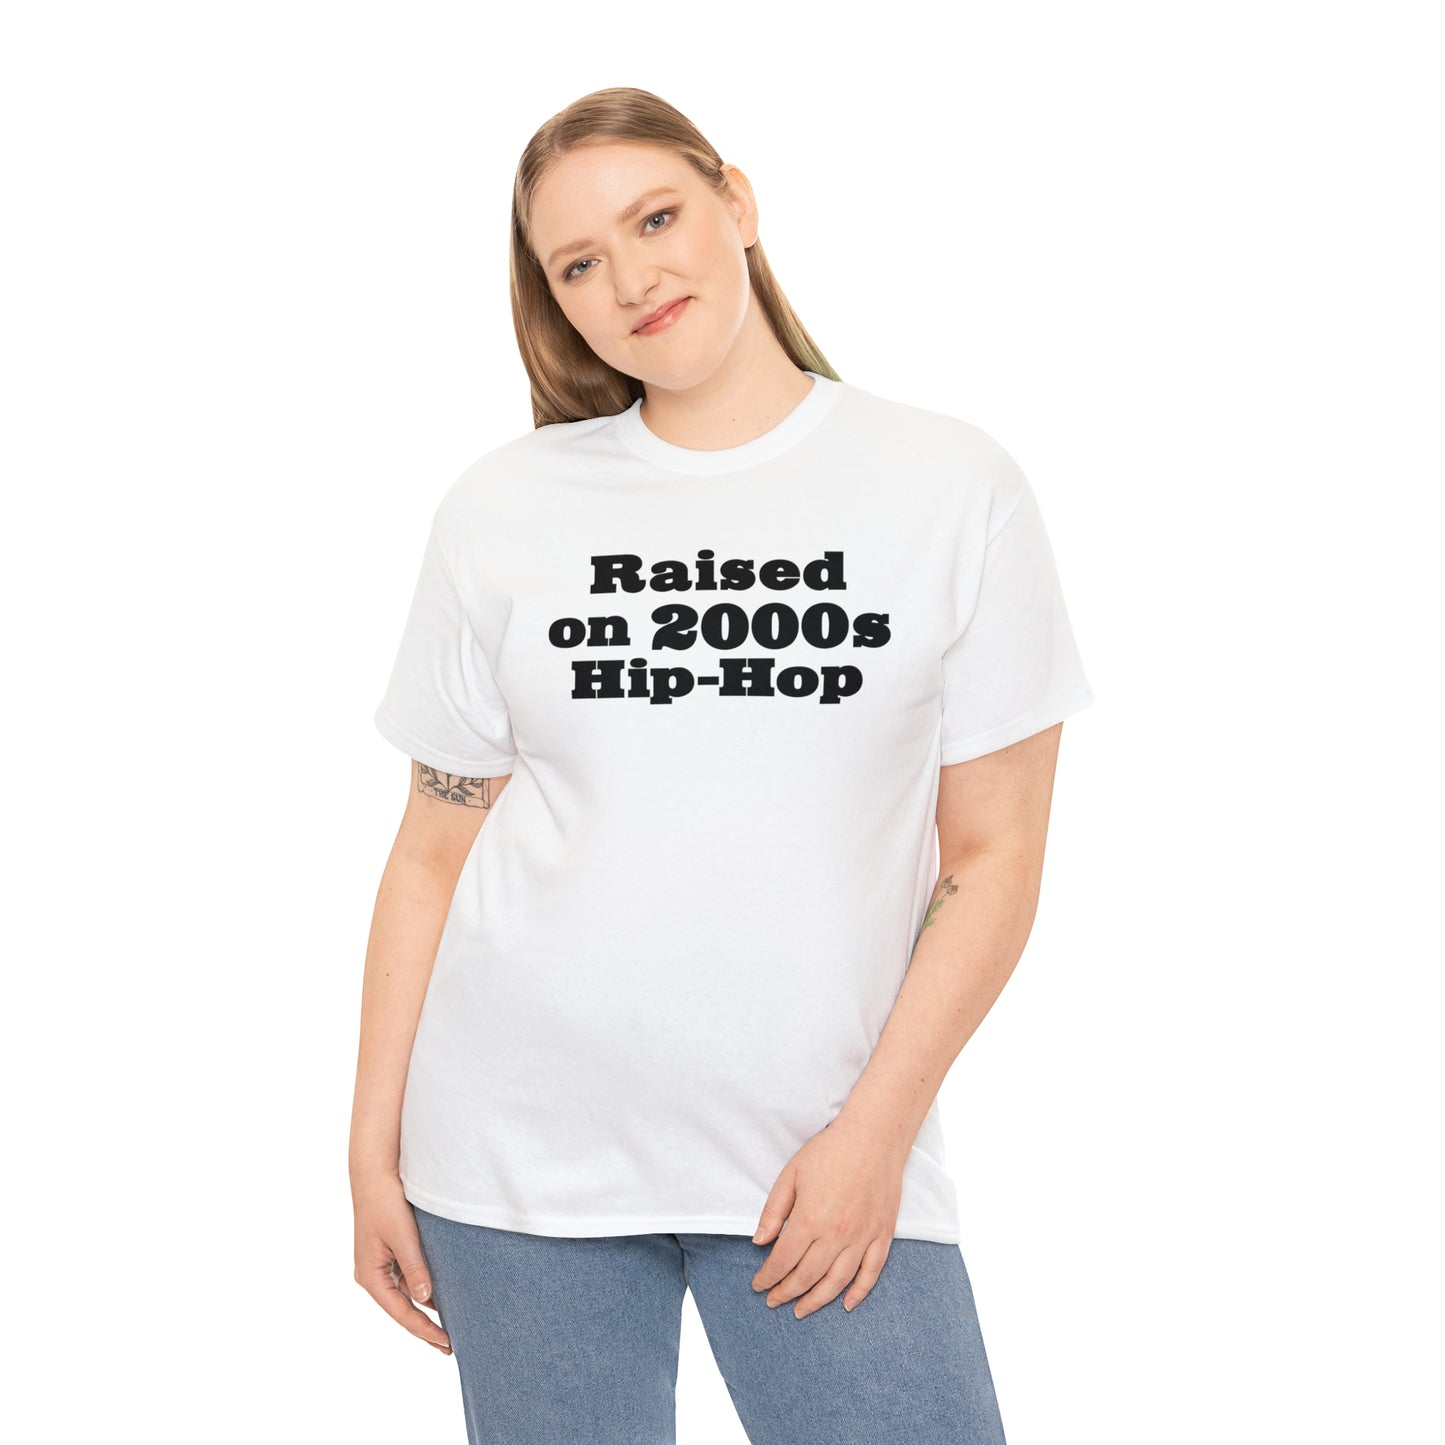 Raised on 2000s Hip-Hop Shirt Great gift for a 2000s Hip-Hop & Rap Lover T-Shirt